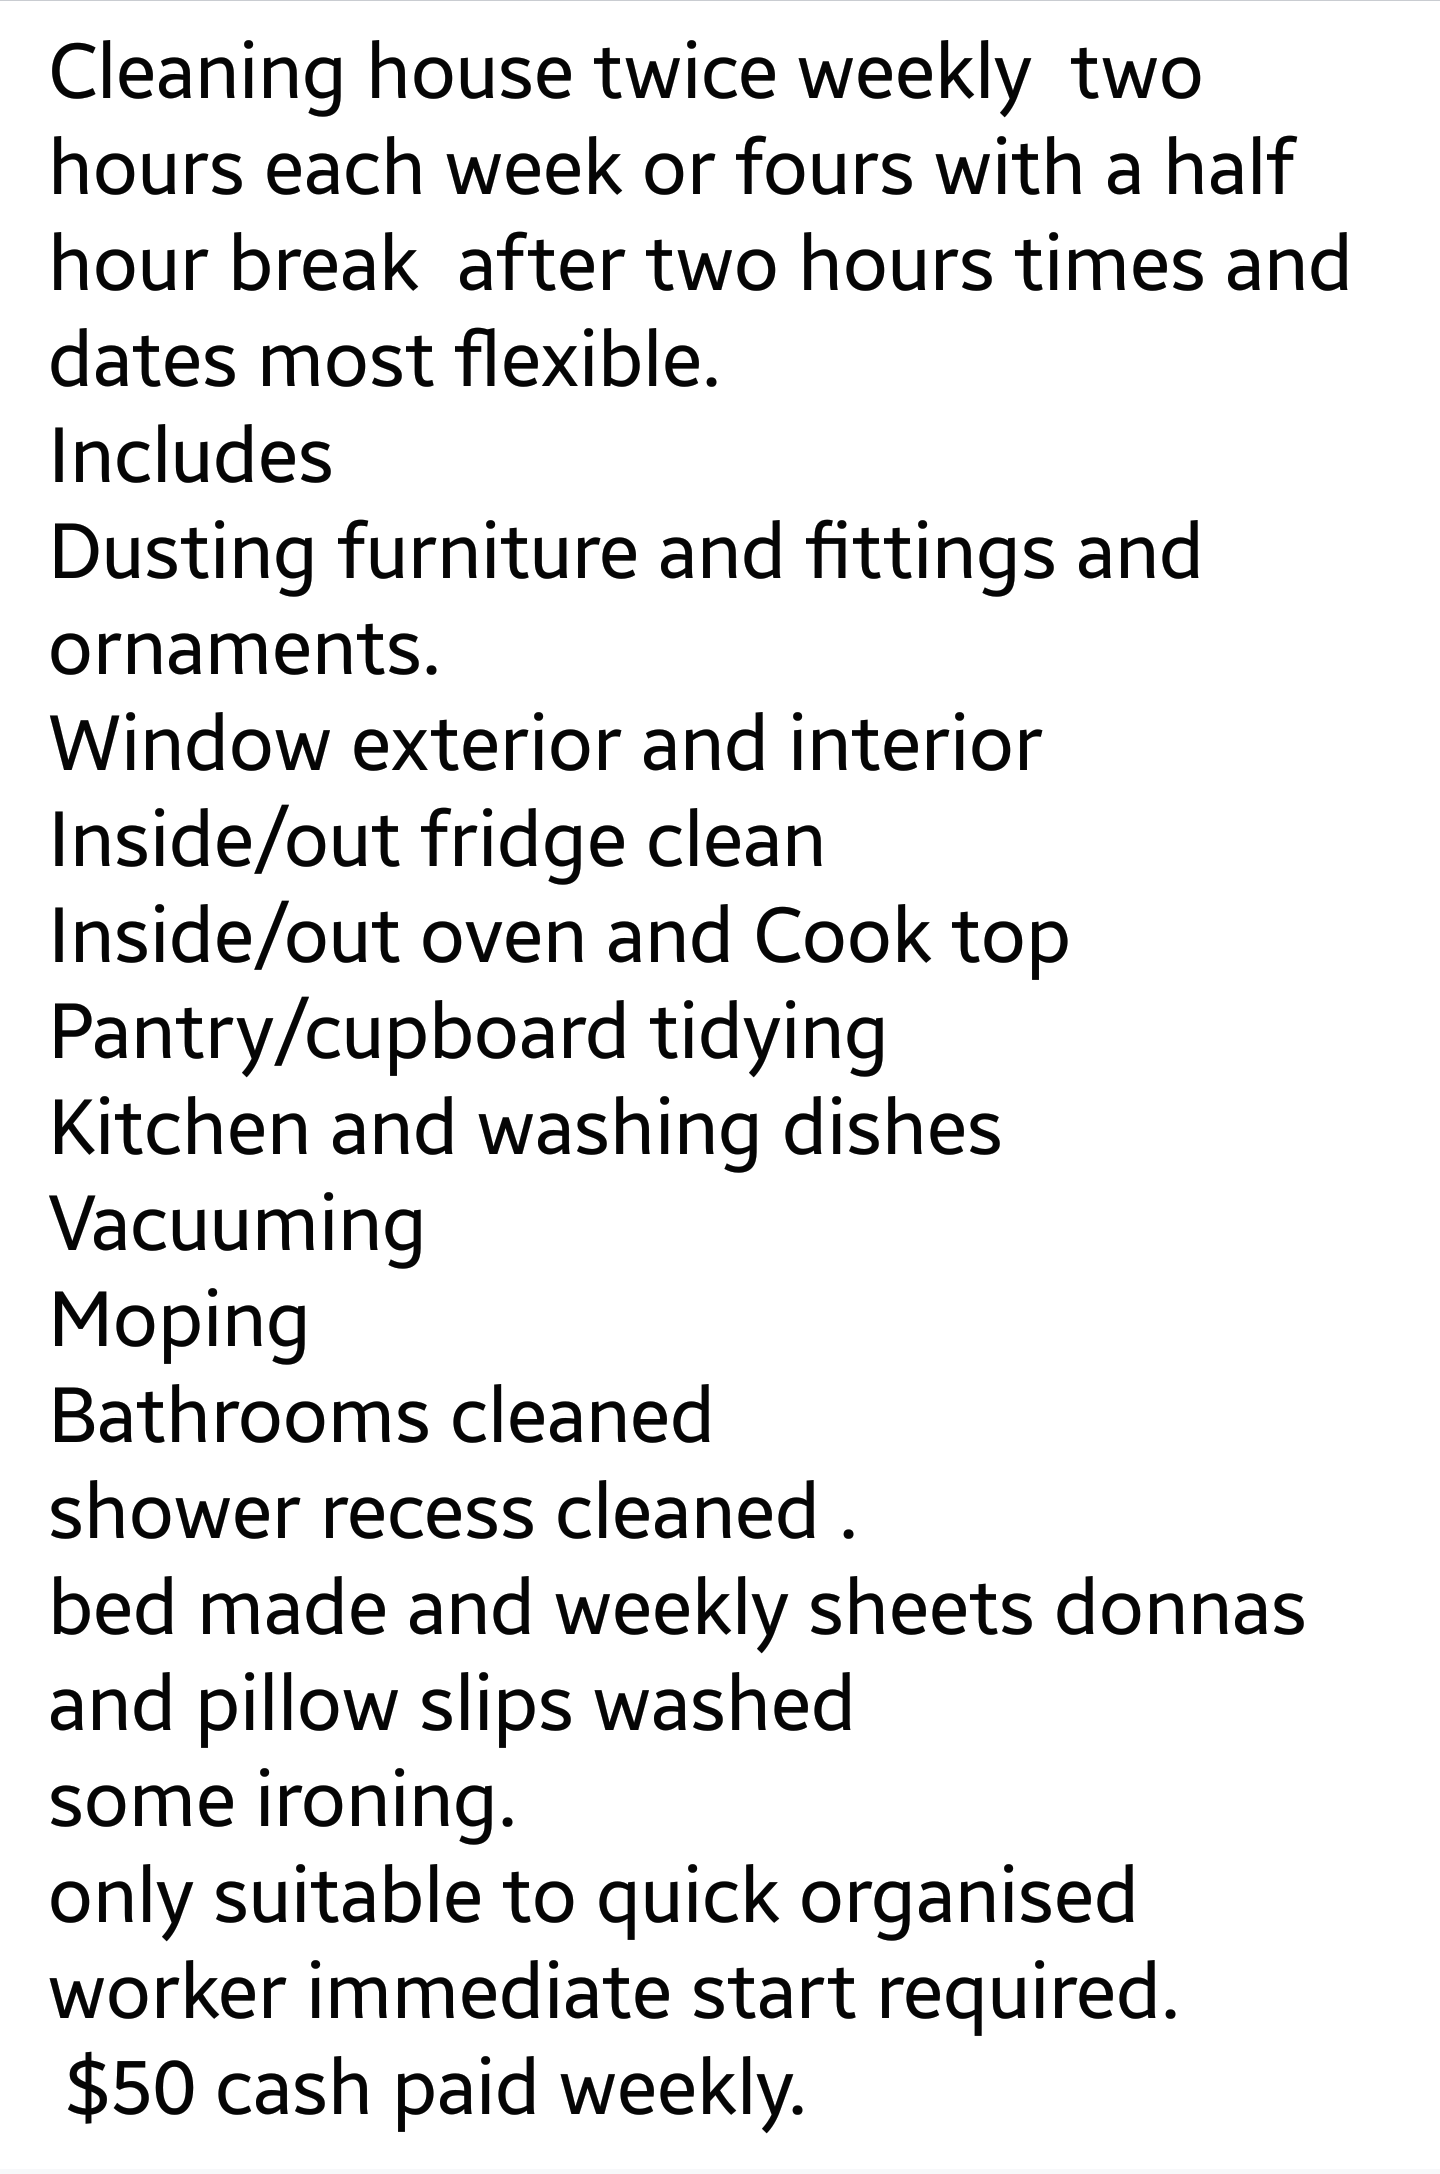 PATTIE X LIPTA - Cleaning house twice weekly two hours each week or fours with a half hour break after two hours times and dates most flexible. Includes Dusting furniture and fittings and ornaments. Window exterior and interior Insideout fridge clean Insi